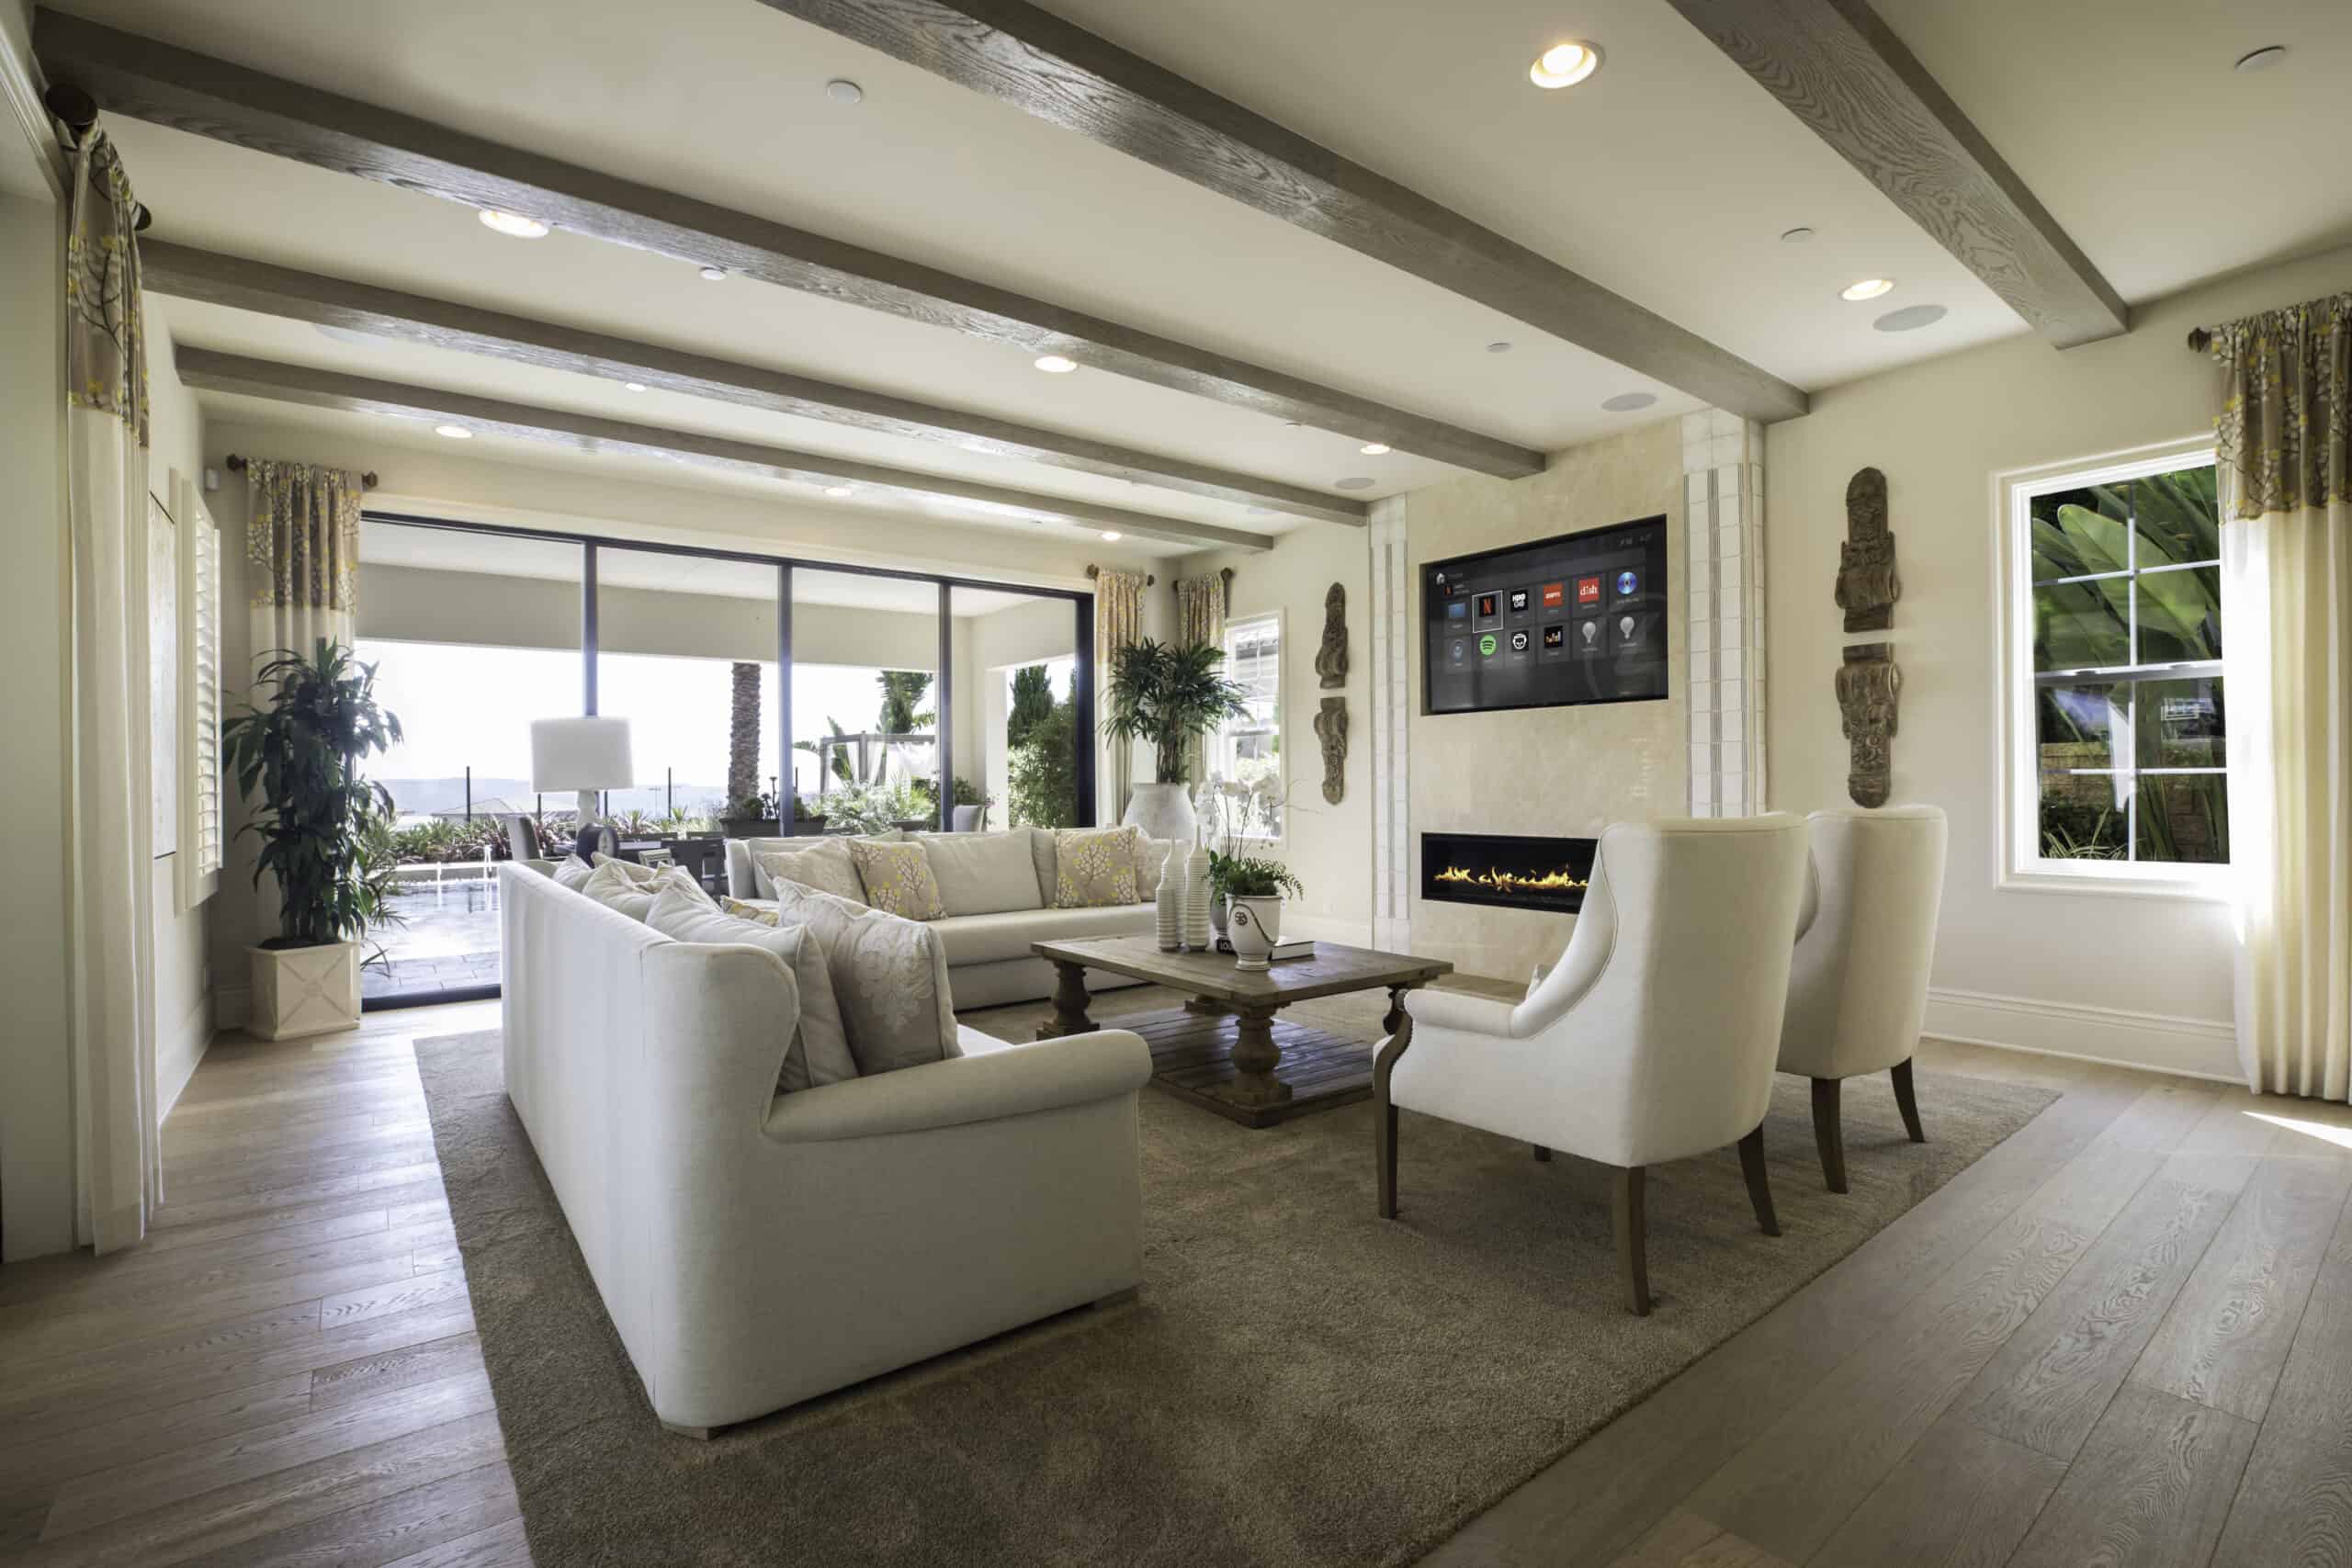 A living room with white furniture and a fireplace equipped with audio capabilities for multi-room entertainment.